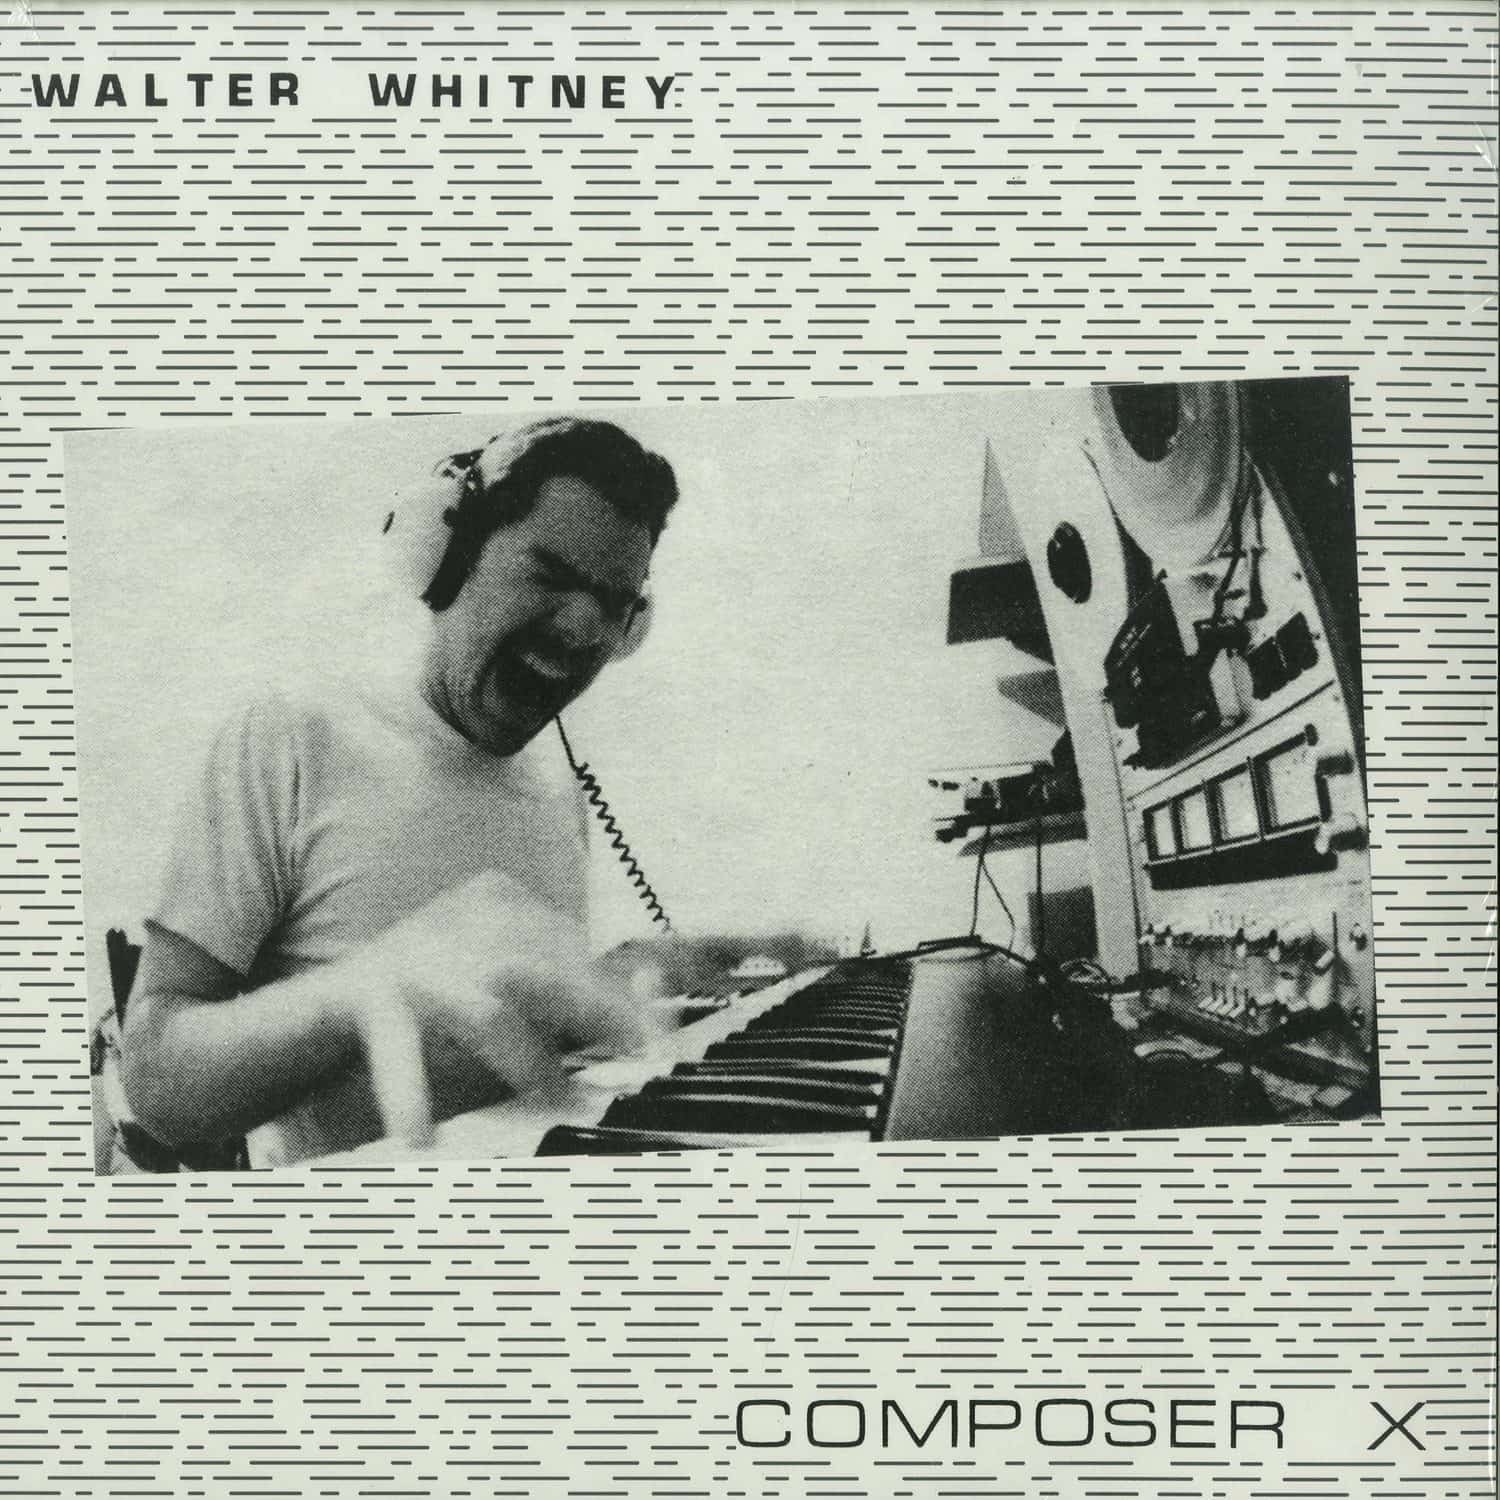 Walter Whitney - COMPOSER X